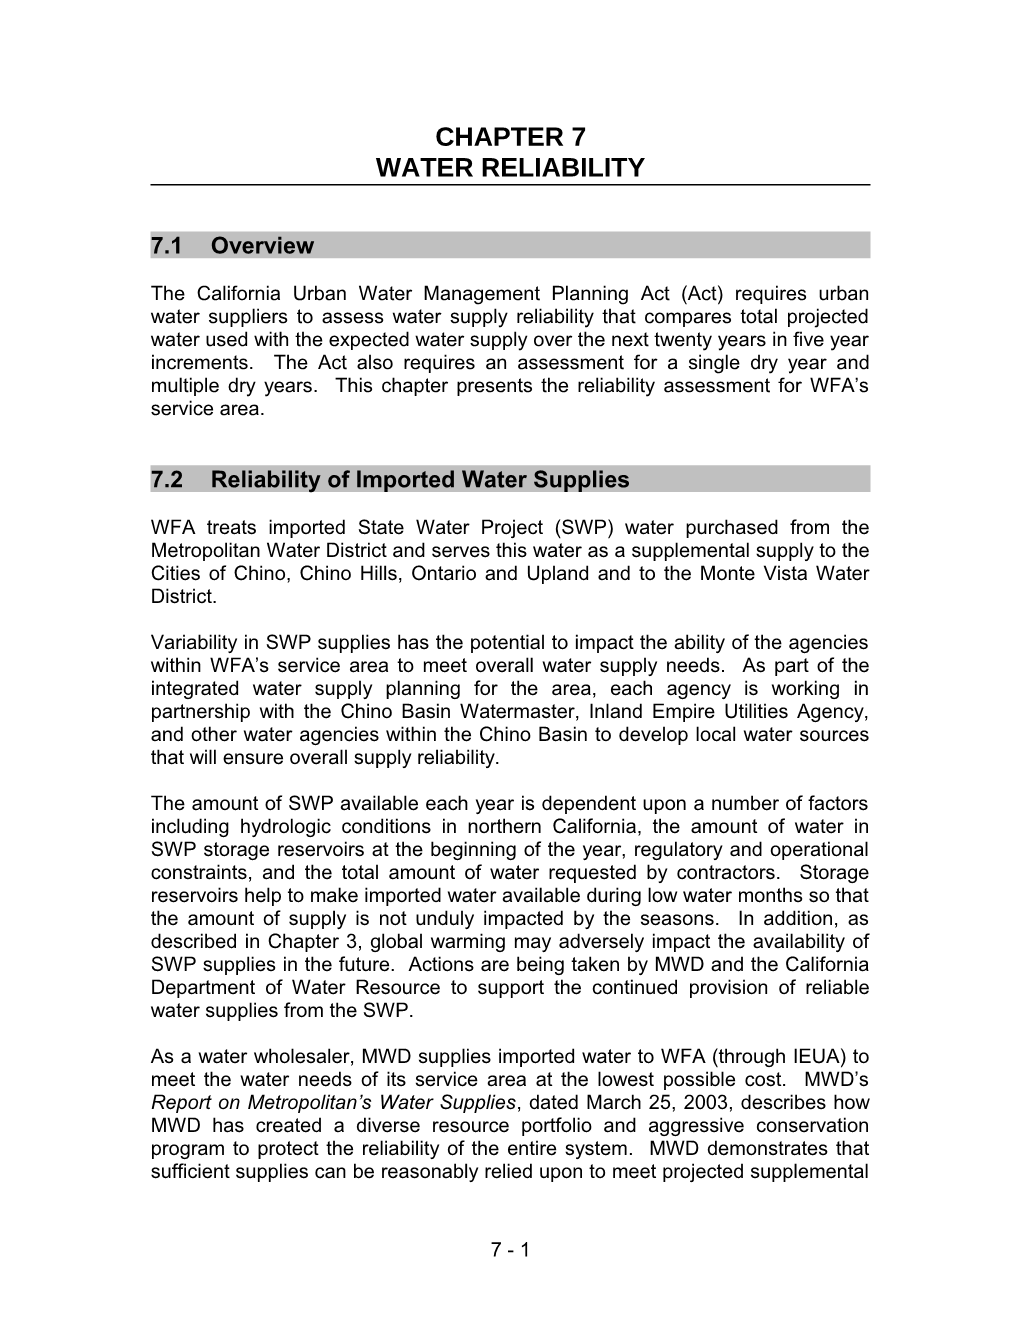 7.2 Reliability of Imported Water Supplies